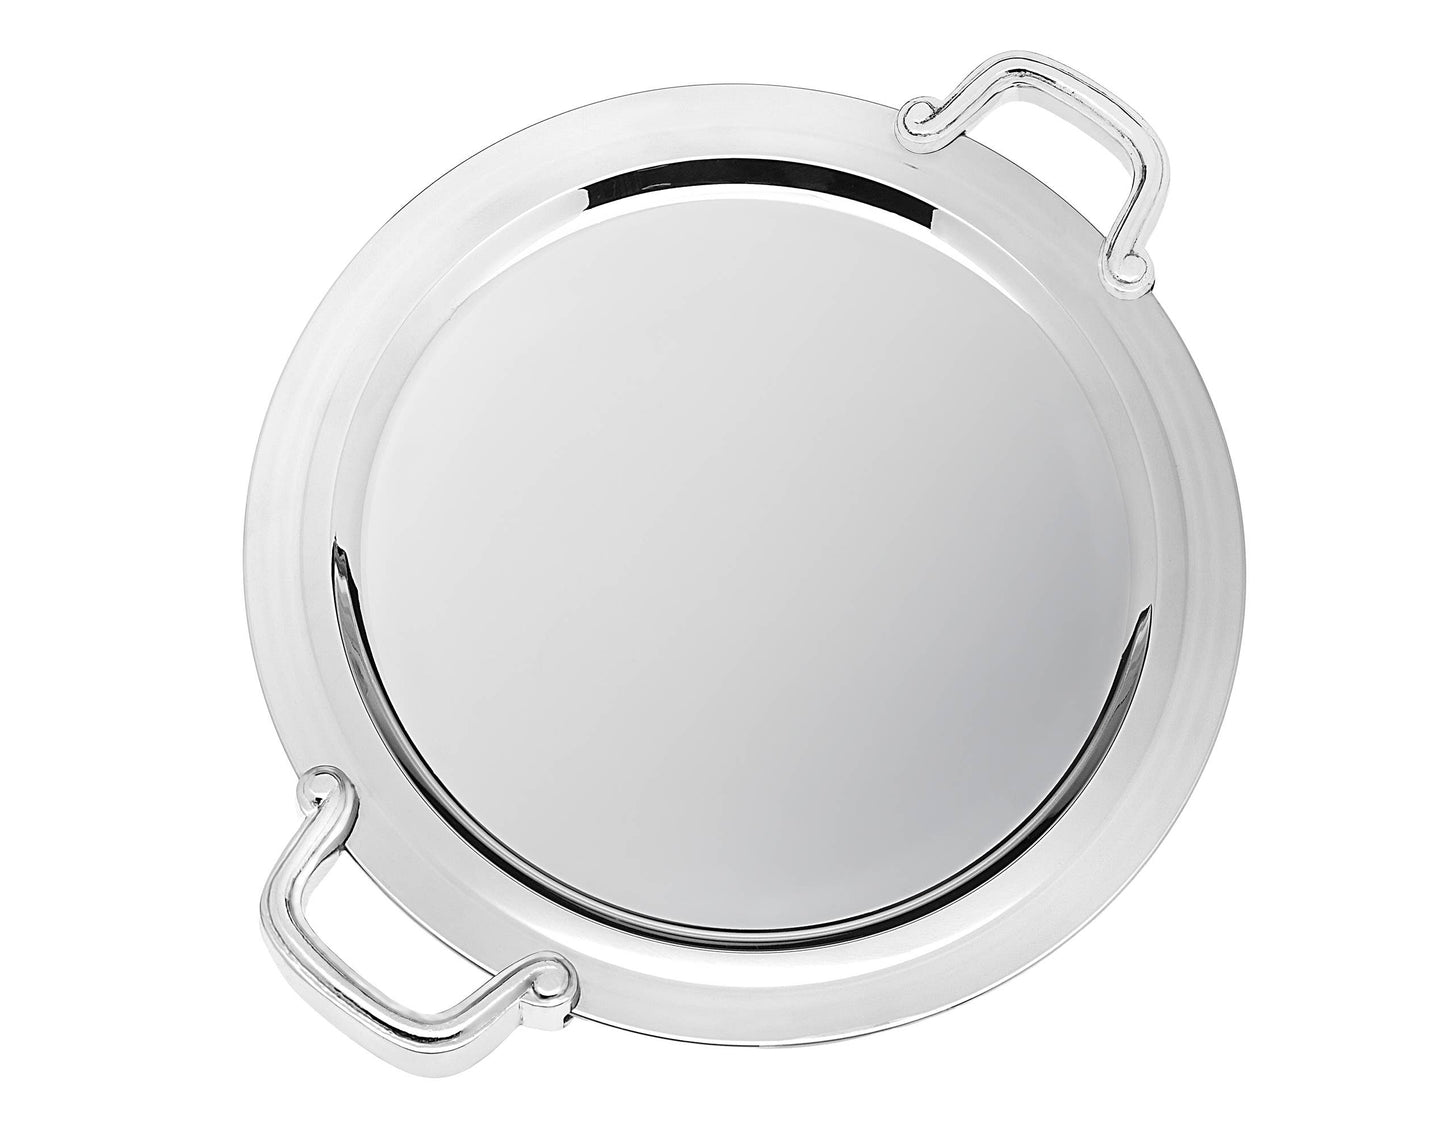 Revere 14" Round Tray: Stainless Steel